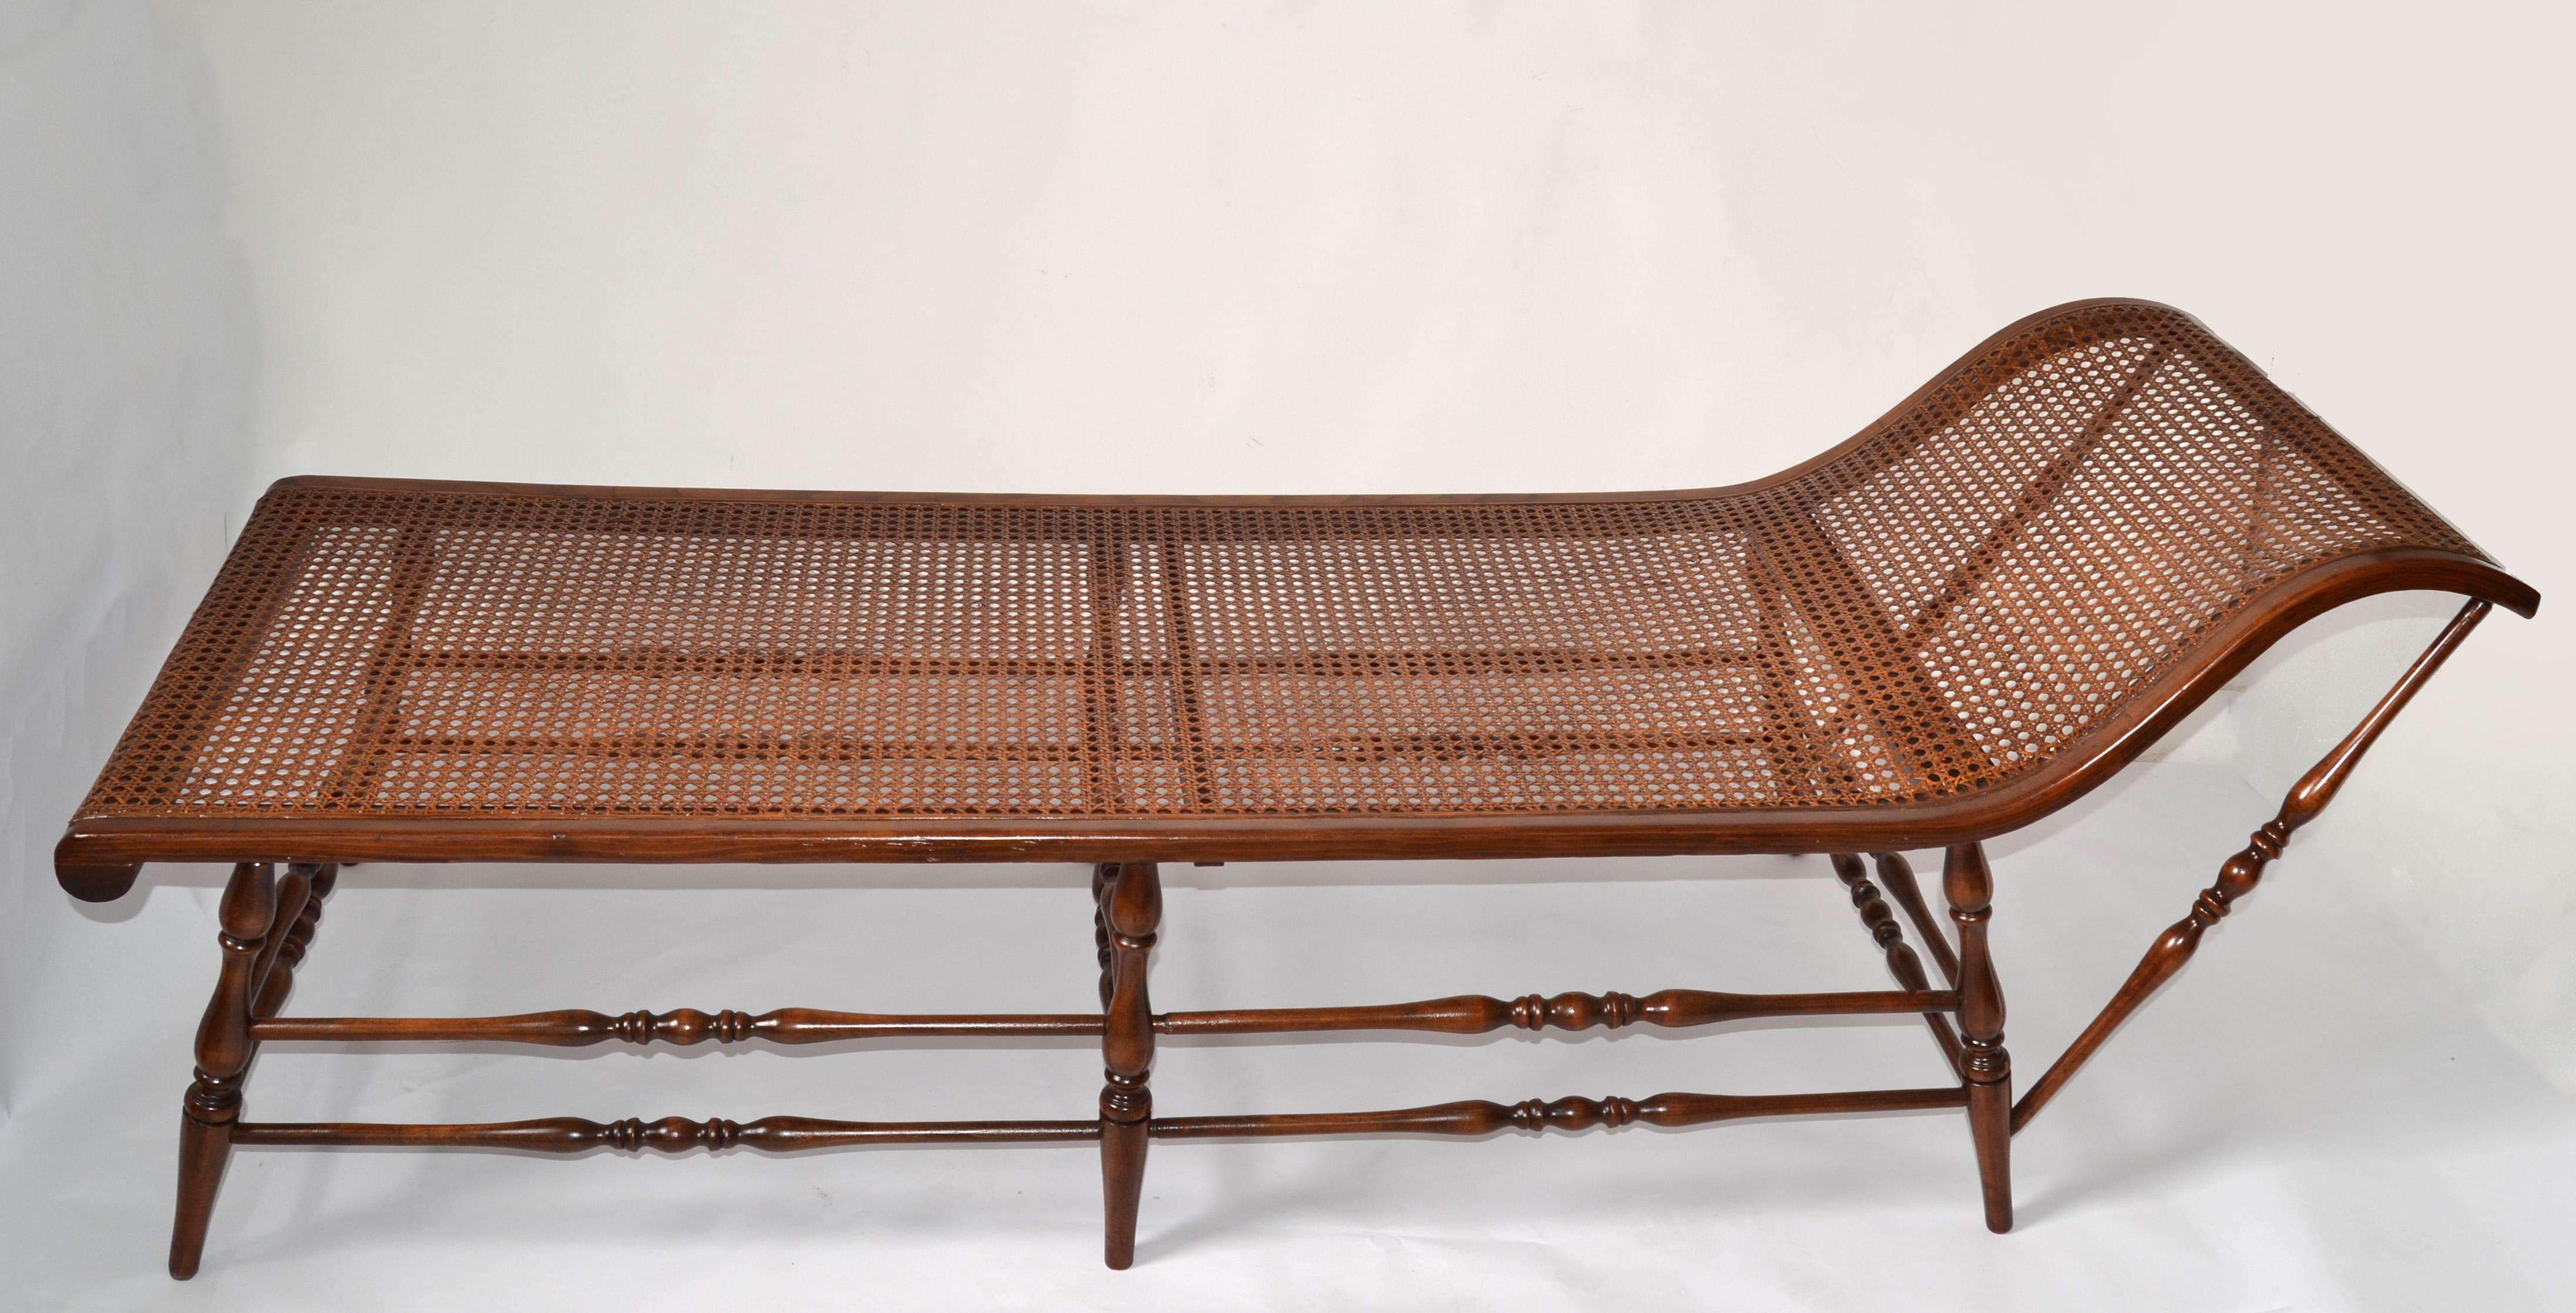 British Colonial Handwoven Cane Turned Wood Spindle Frame Chaise Lounge Daybed In Good Condition For Sale In Miami, FL